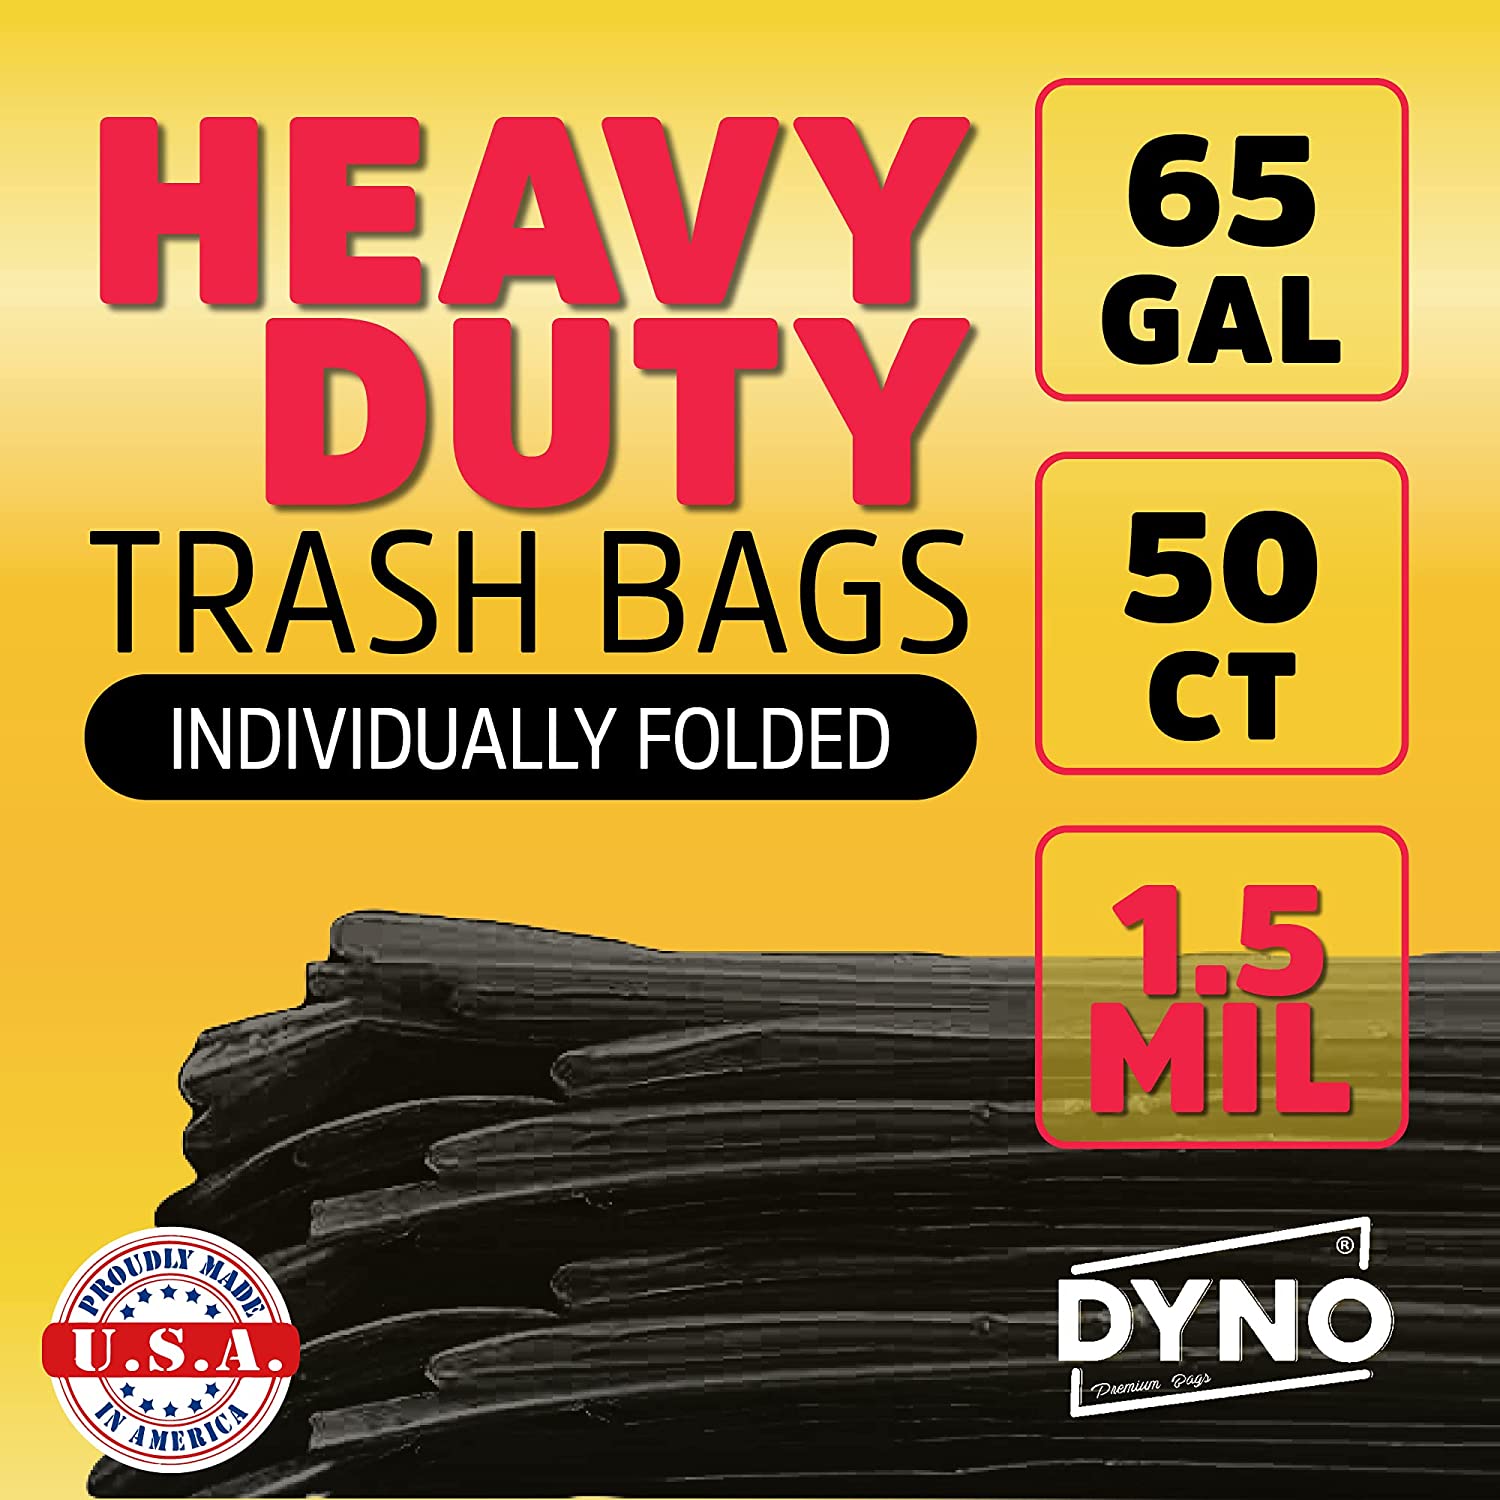 Dyno Products Online 65 Gallon Large, Heavy Duty Trash Bags, 1.5 Mil Black  - 50 Count - Individually Folded – 50W x 48L 